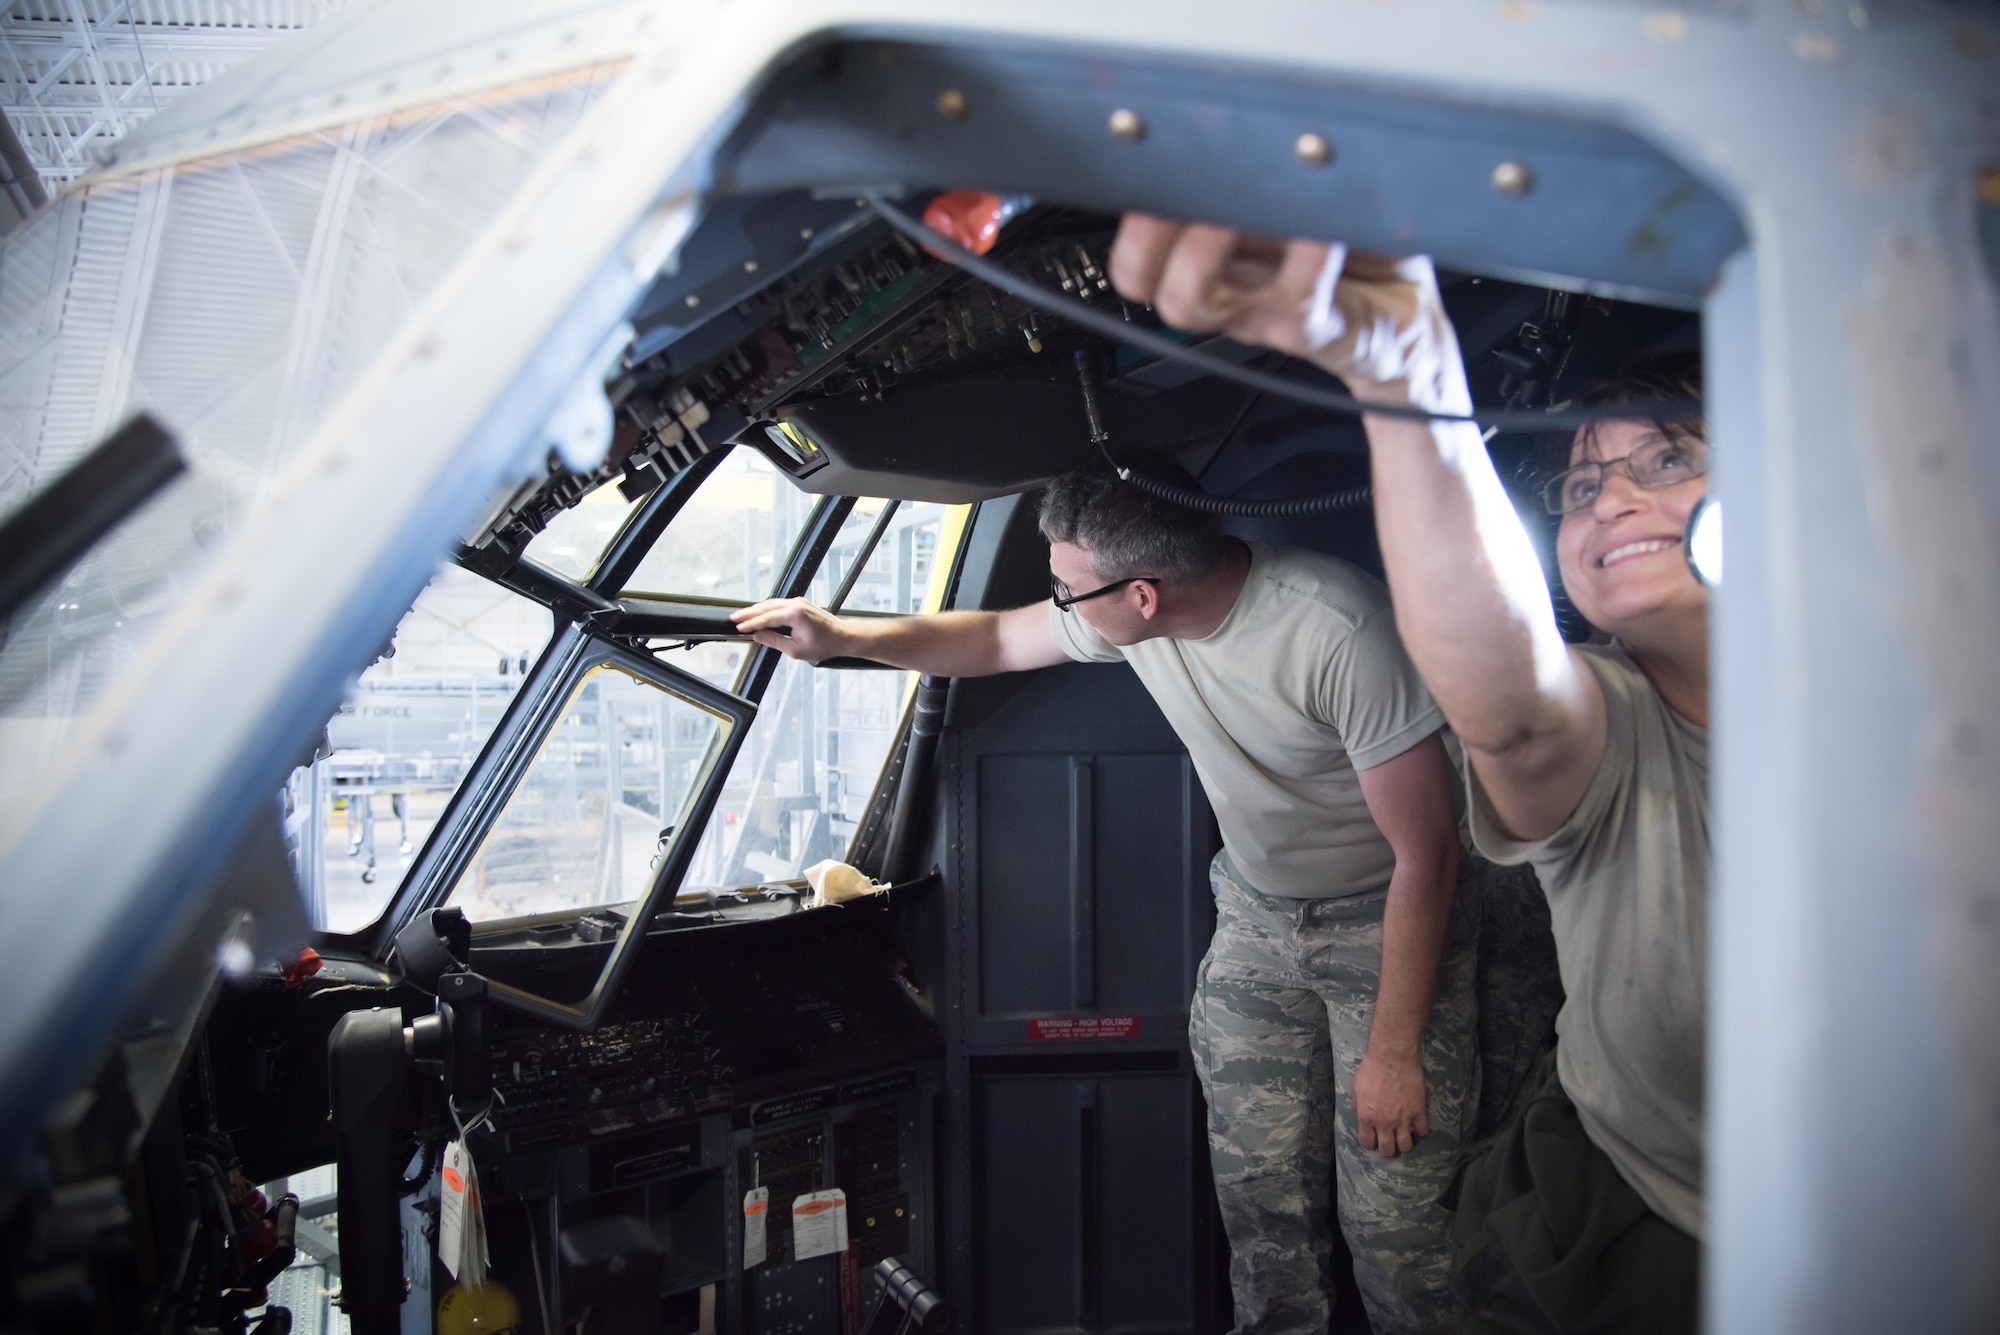 Senior Airman Gage Adkins, 913th Maintenance Squadron crew chief from Little Rock Air Force Base, Arkansas, and Master Sgt. Angela Psket, 403rd Maintenance Squadron crew chief, check the window seals in a C-130J Super Hercules aircraft July 24, 2017 at Keesler AFB, Mississippi. (U.S. Air Force photo/Staff Sgt. Heather Heiney)